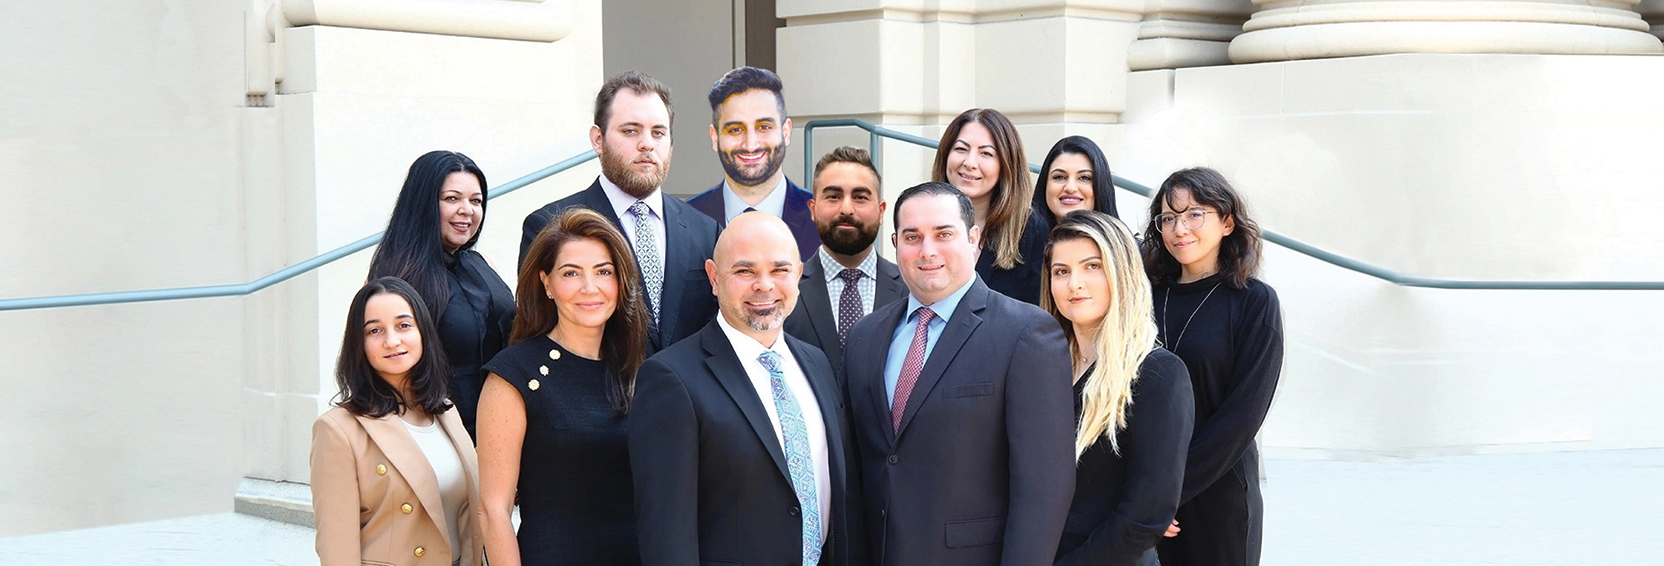 Baghdaserians Law Group